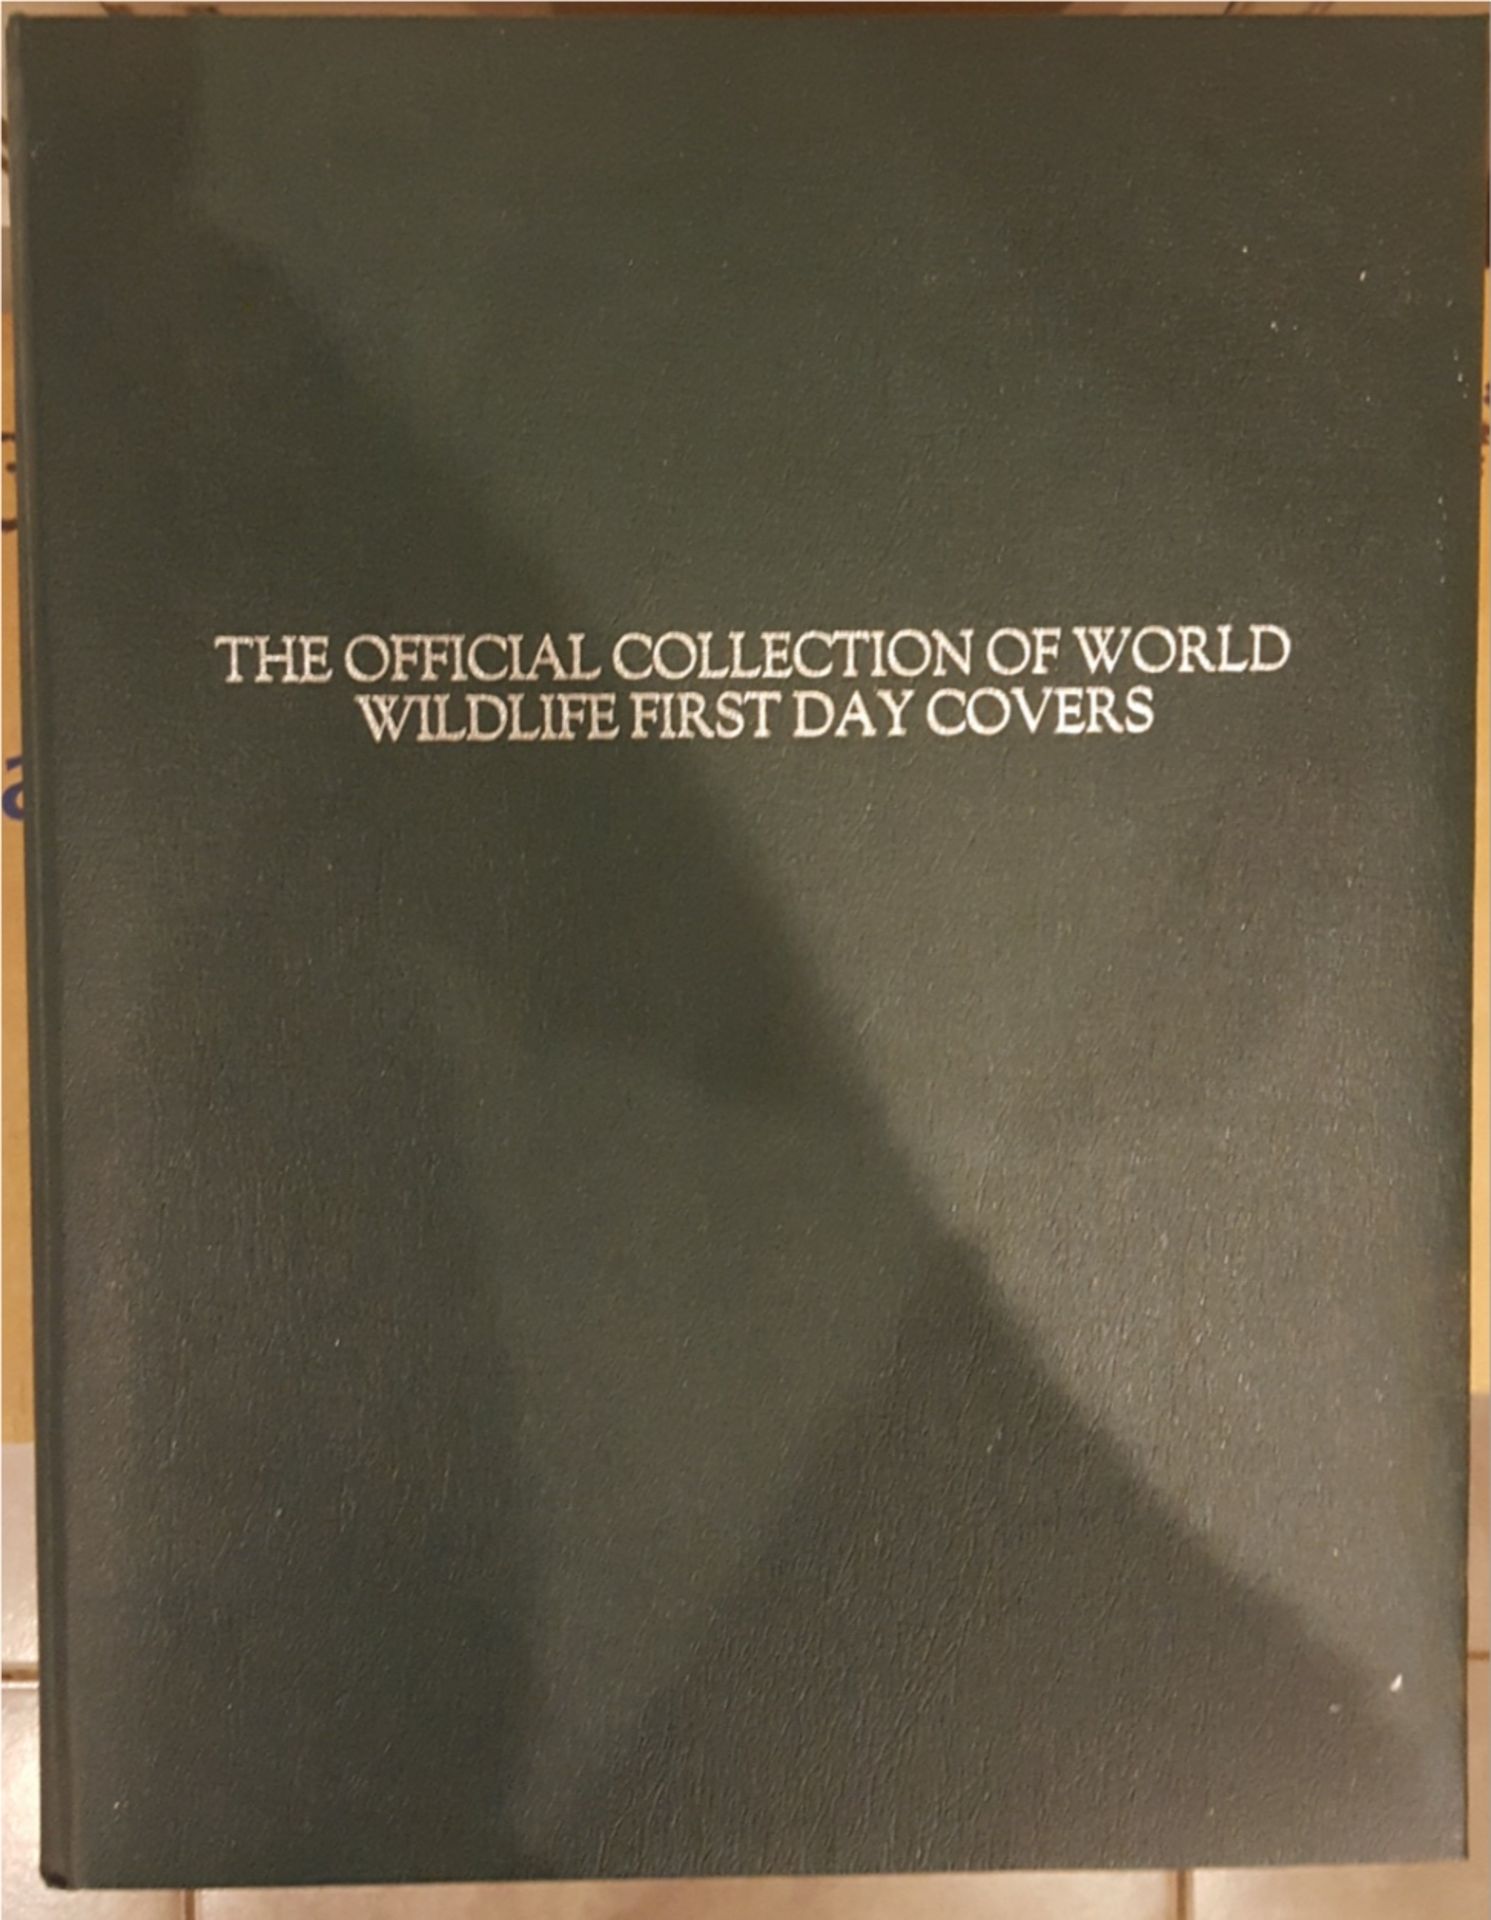 Official Album of World Wildlife Covers